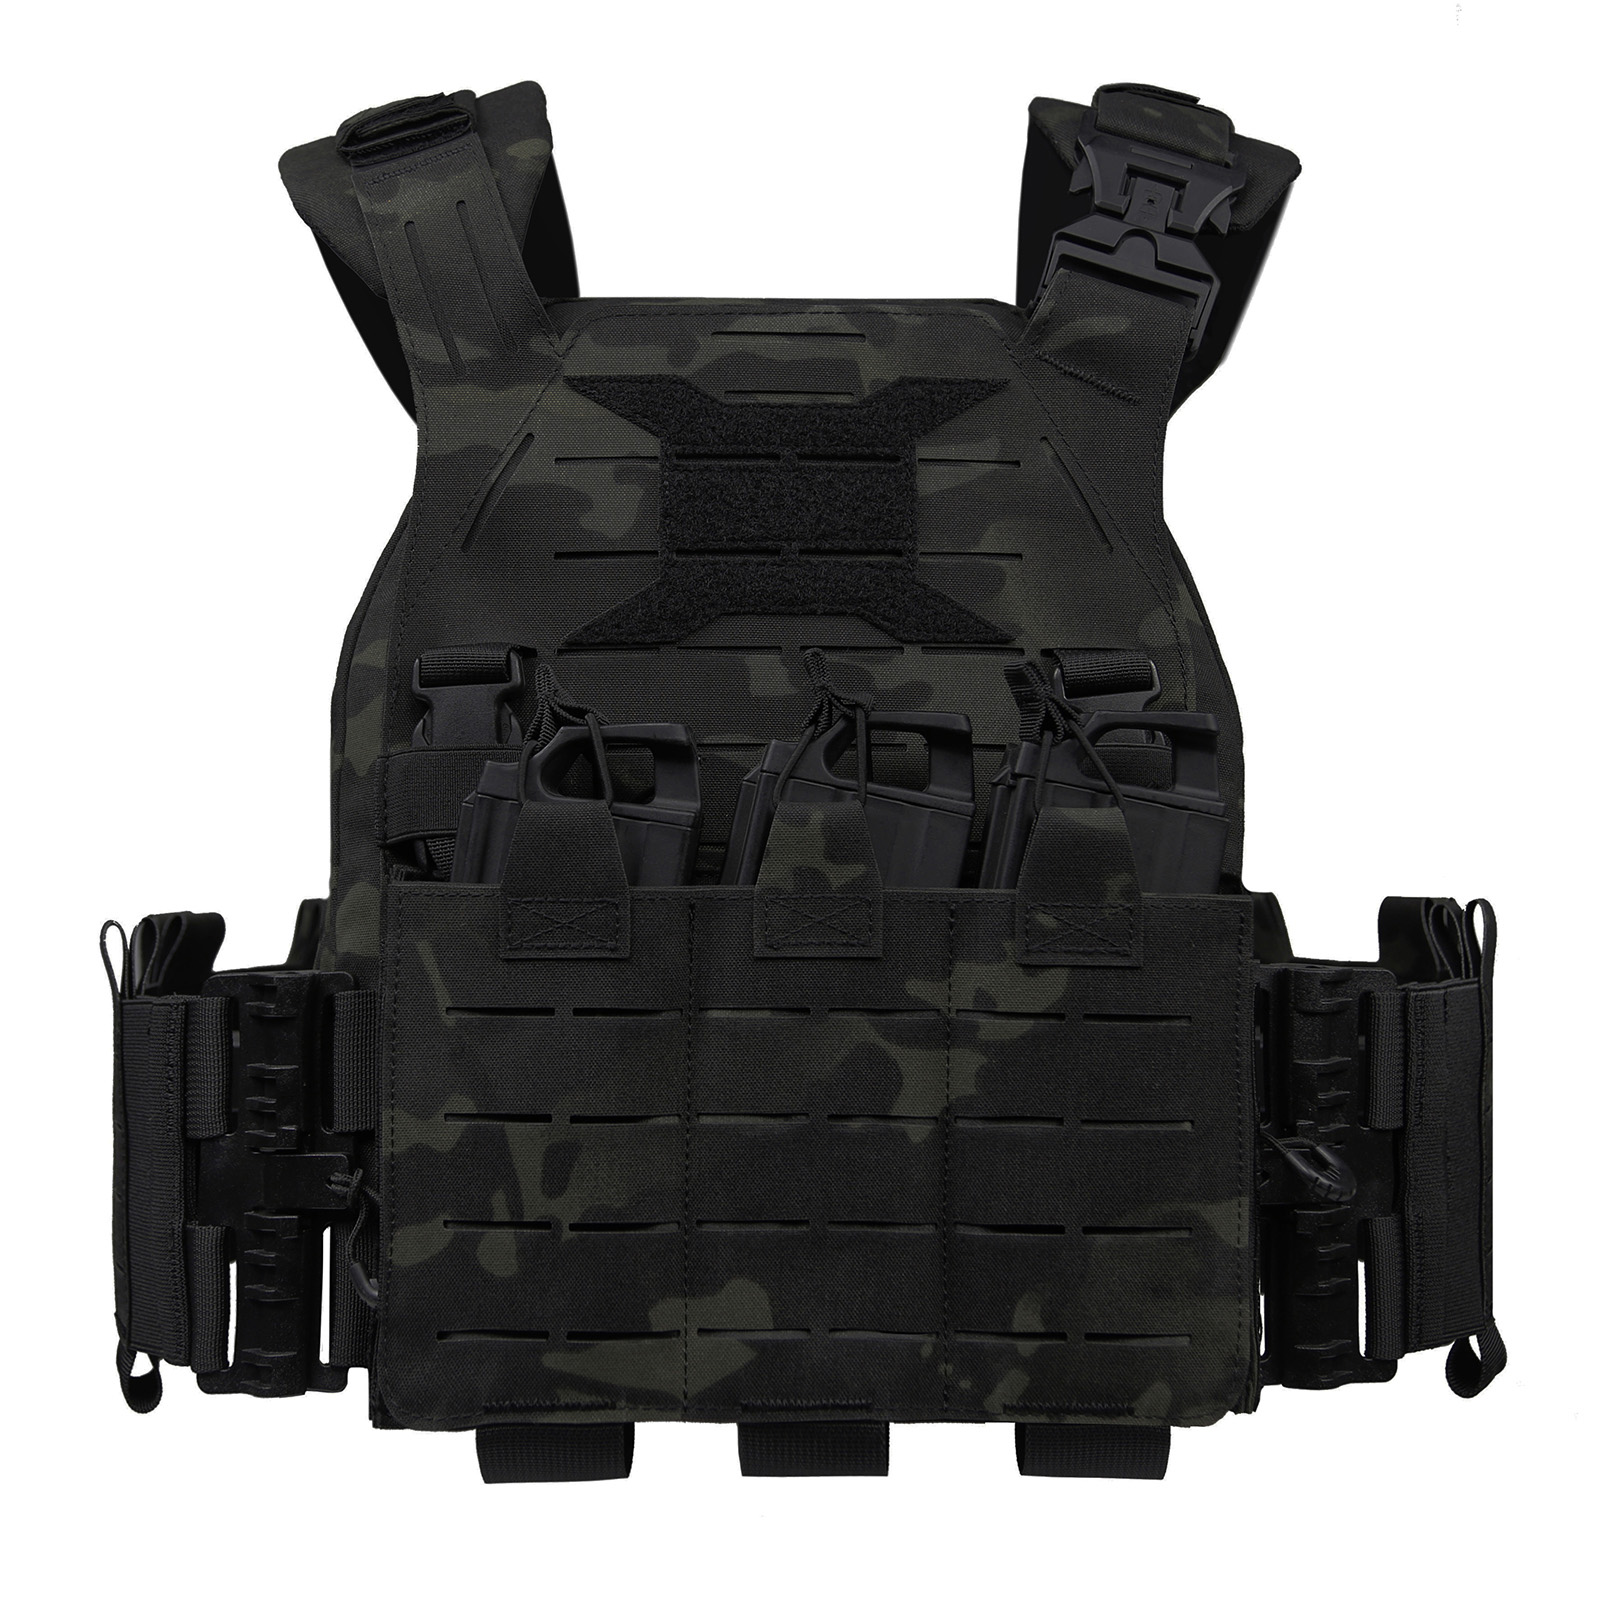 TacticalXmen NIJ Level III Rifle Rated Body Armor and X-RAPTOR Plate  Carrier Package